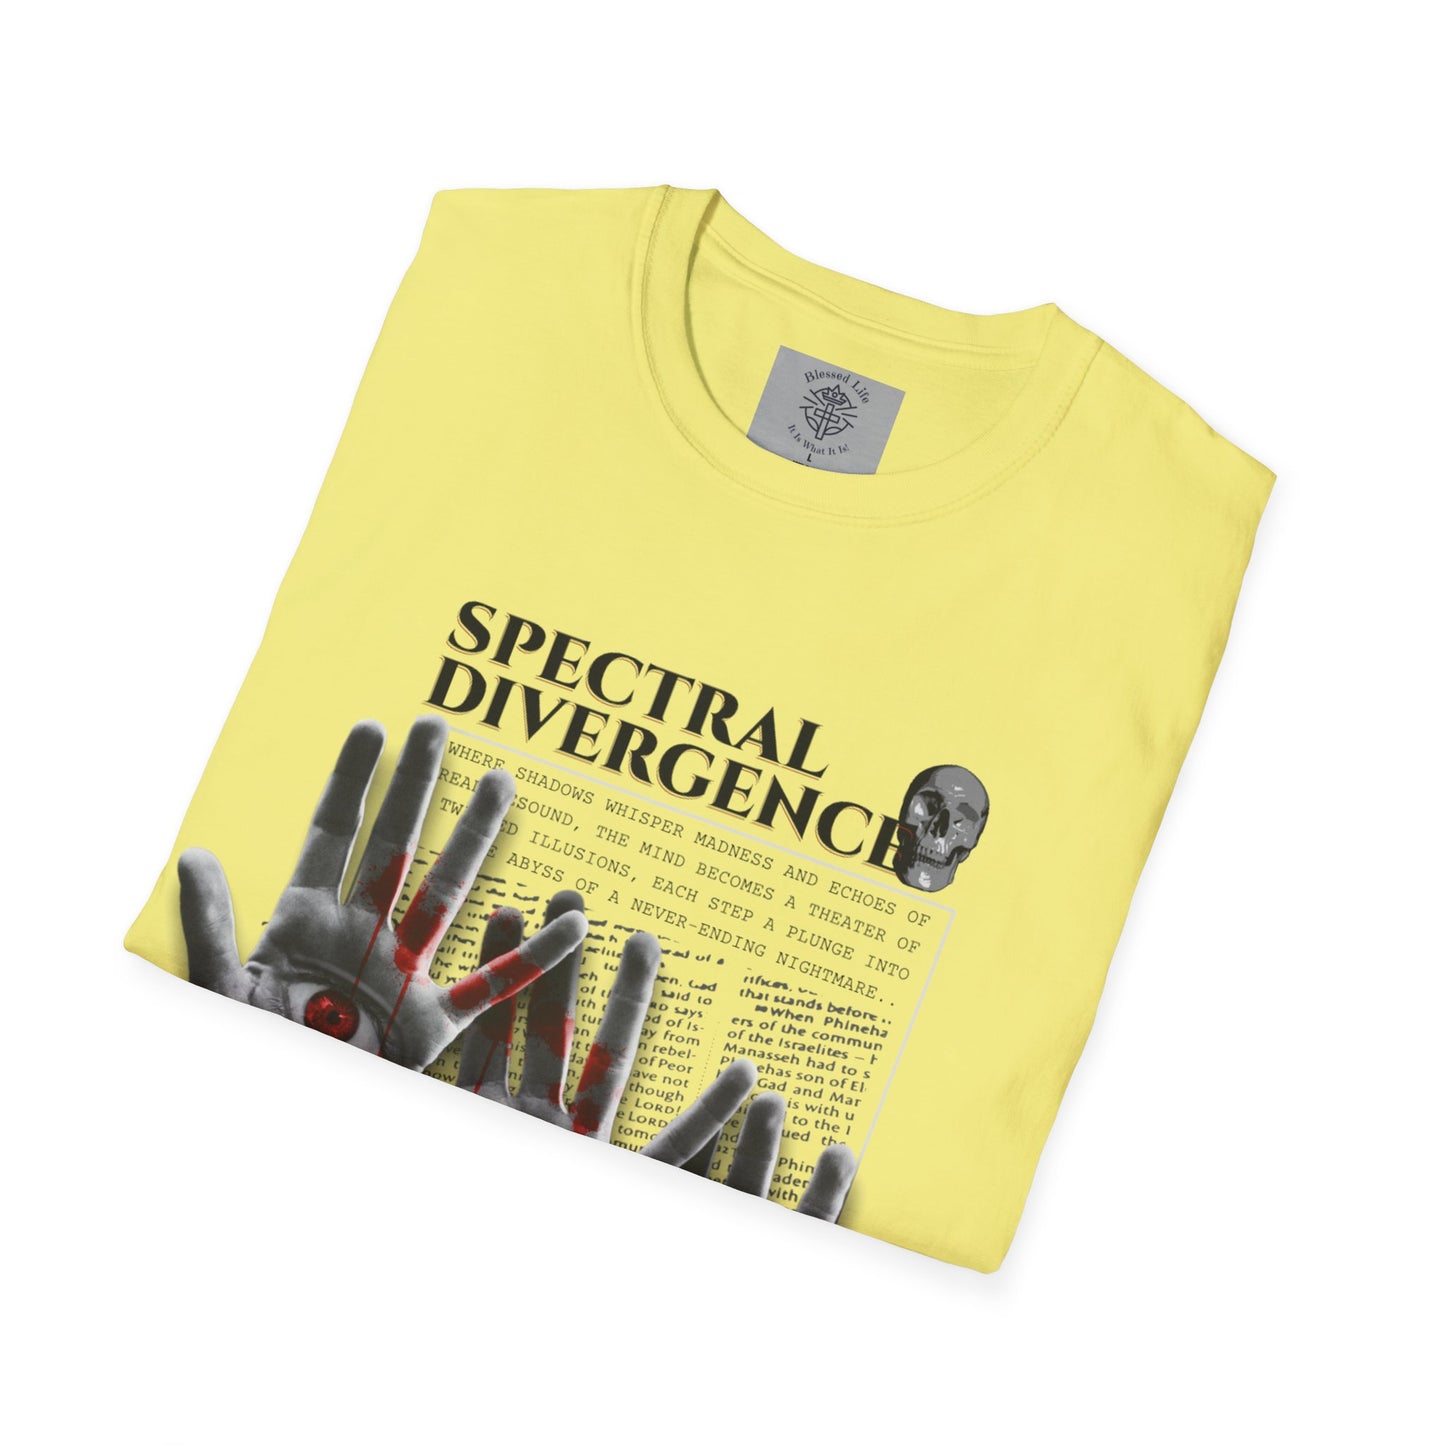 Spectral Divergence Unisex Softstyle T-Shirt